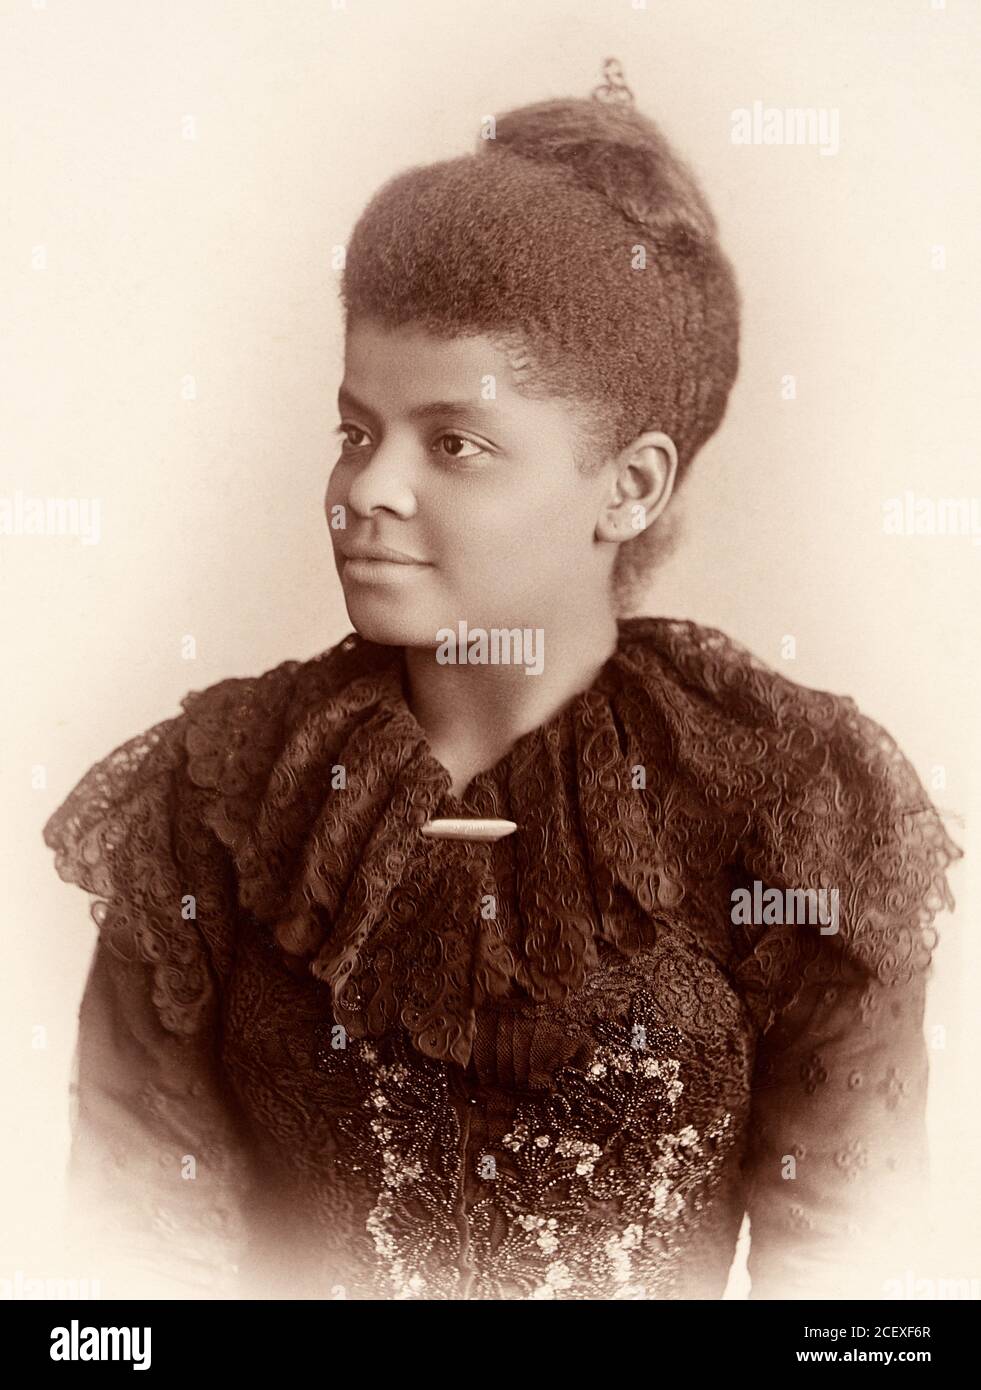 Ida B Wells. Portrait of Ida Bell Wells-Barnett (1862-1931) by Sallie Garrity, 1893. Wells was an American investigative journalist, educator, and an early leader in the civil rights movement. Stock Photo